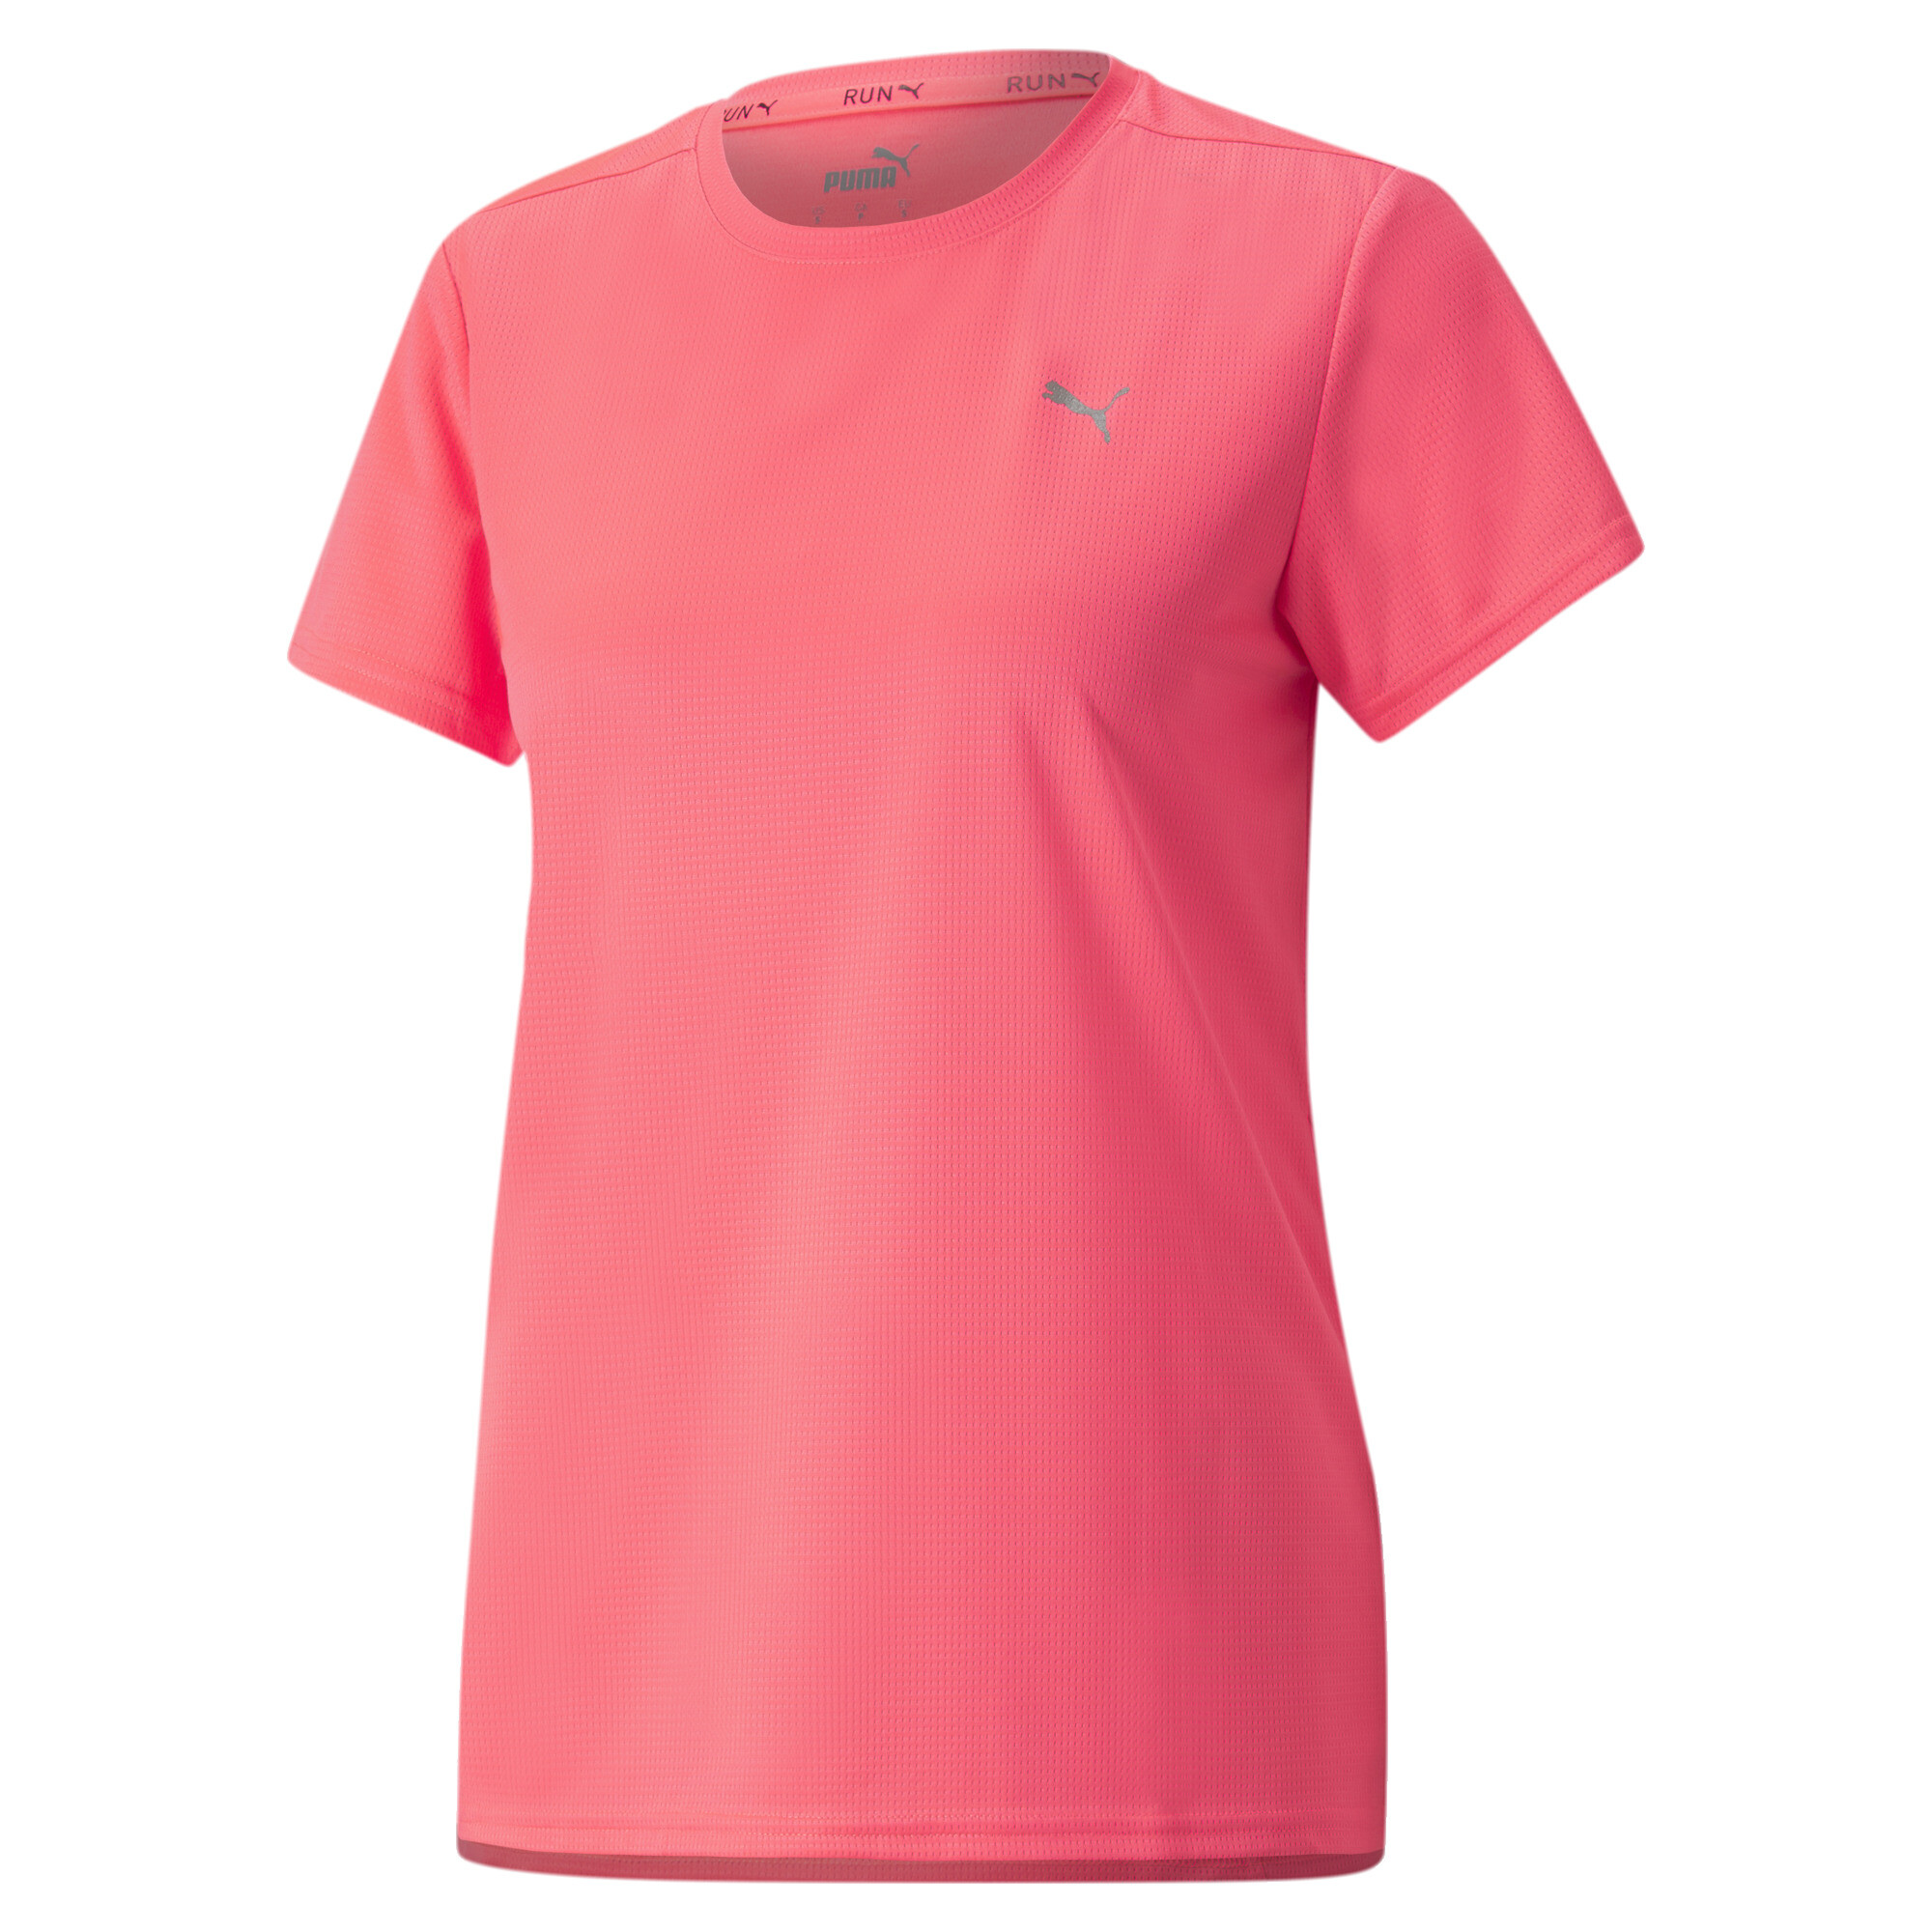 Women's PUMA Favourite Short Sleeve Running T-Shirt In Pink, Size Large